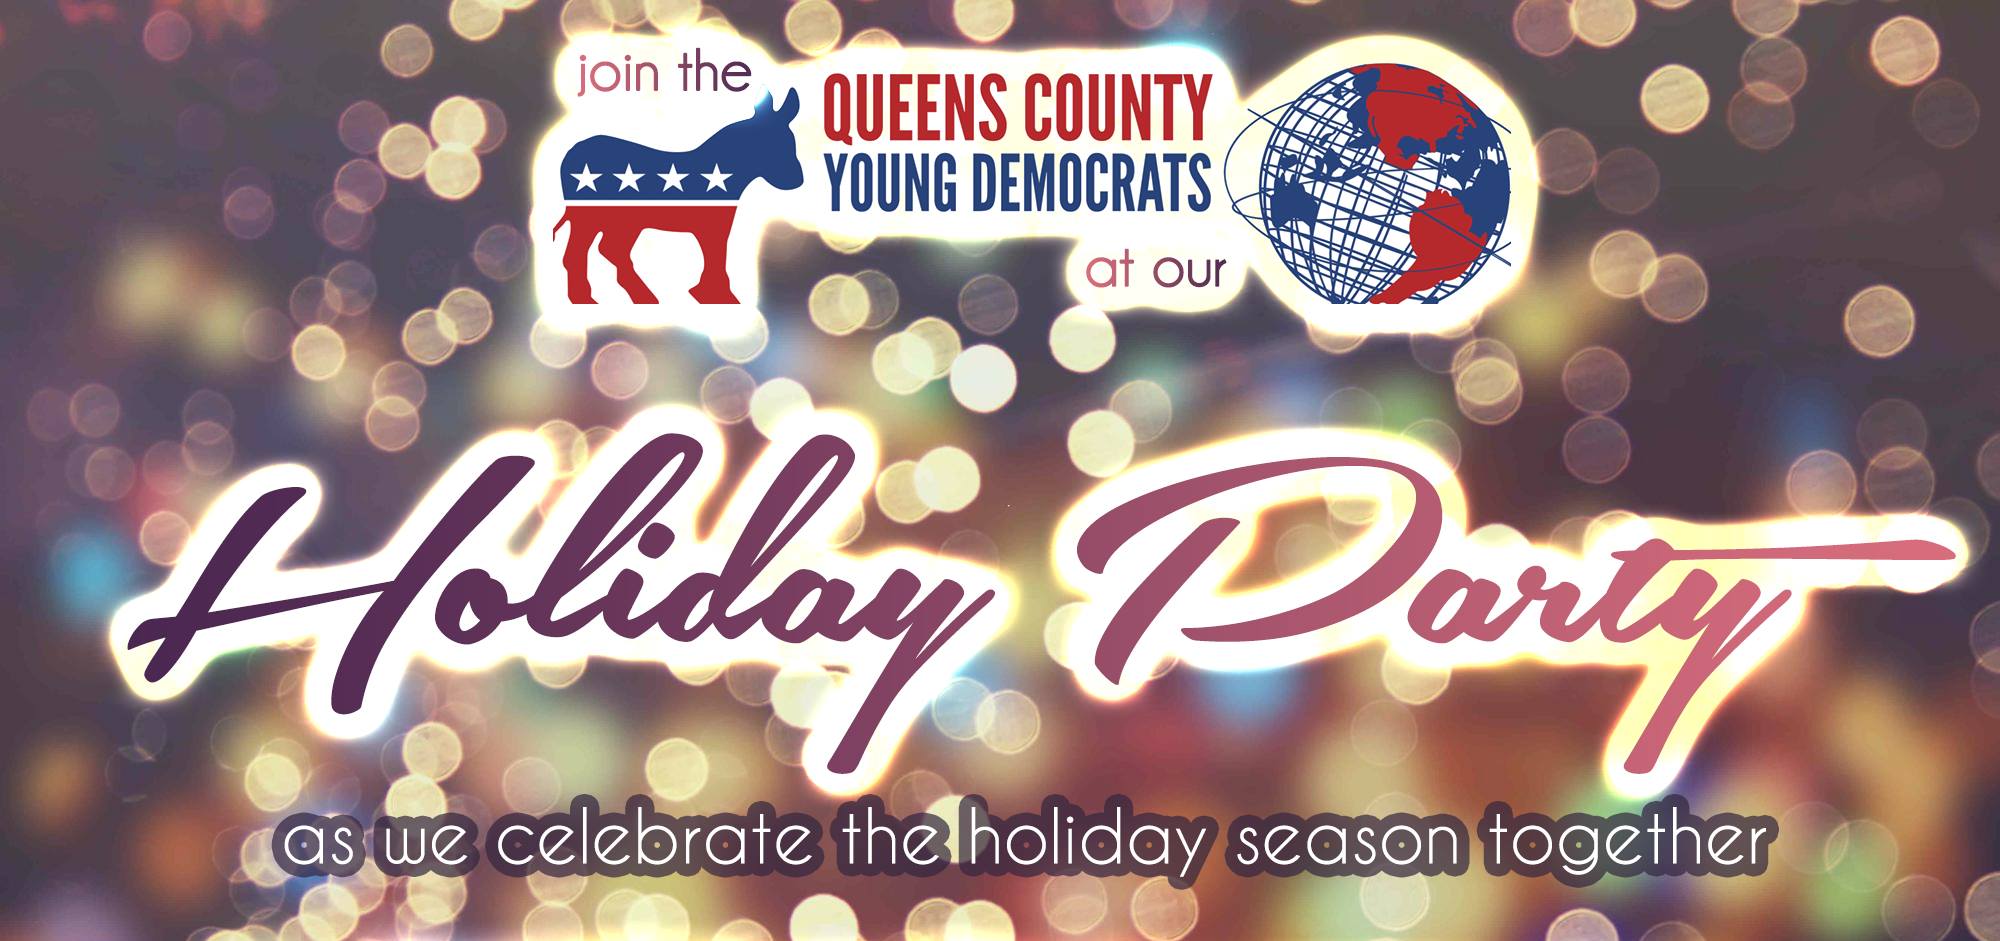 Queens Young Dems Holiday Party - Queens Dems